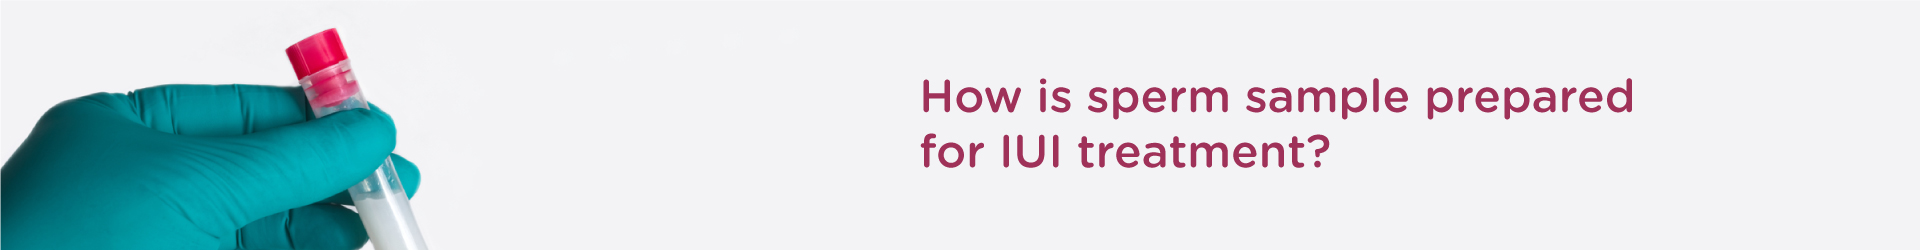  How is the Sperm Sample Prepared for IUI treatment?